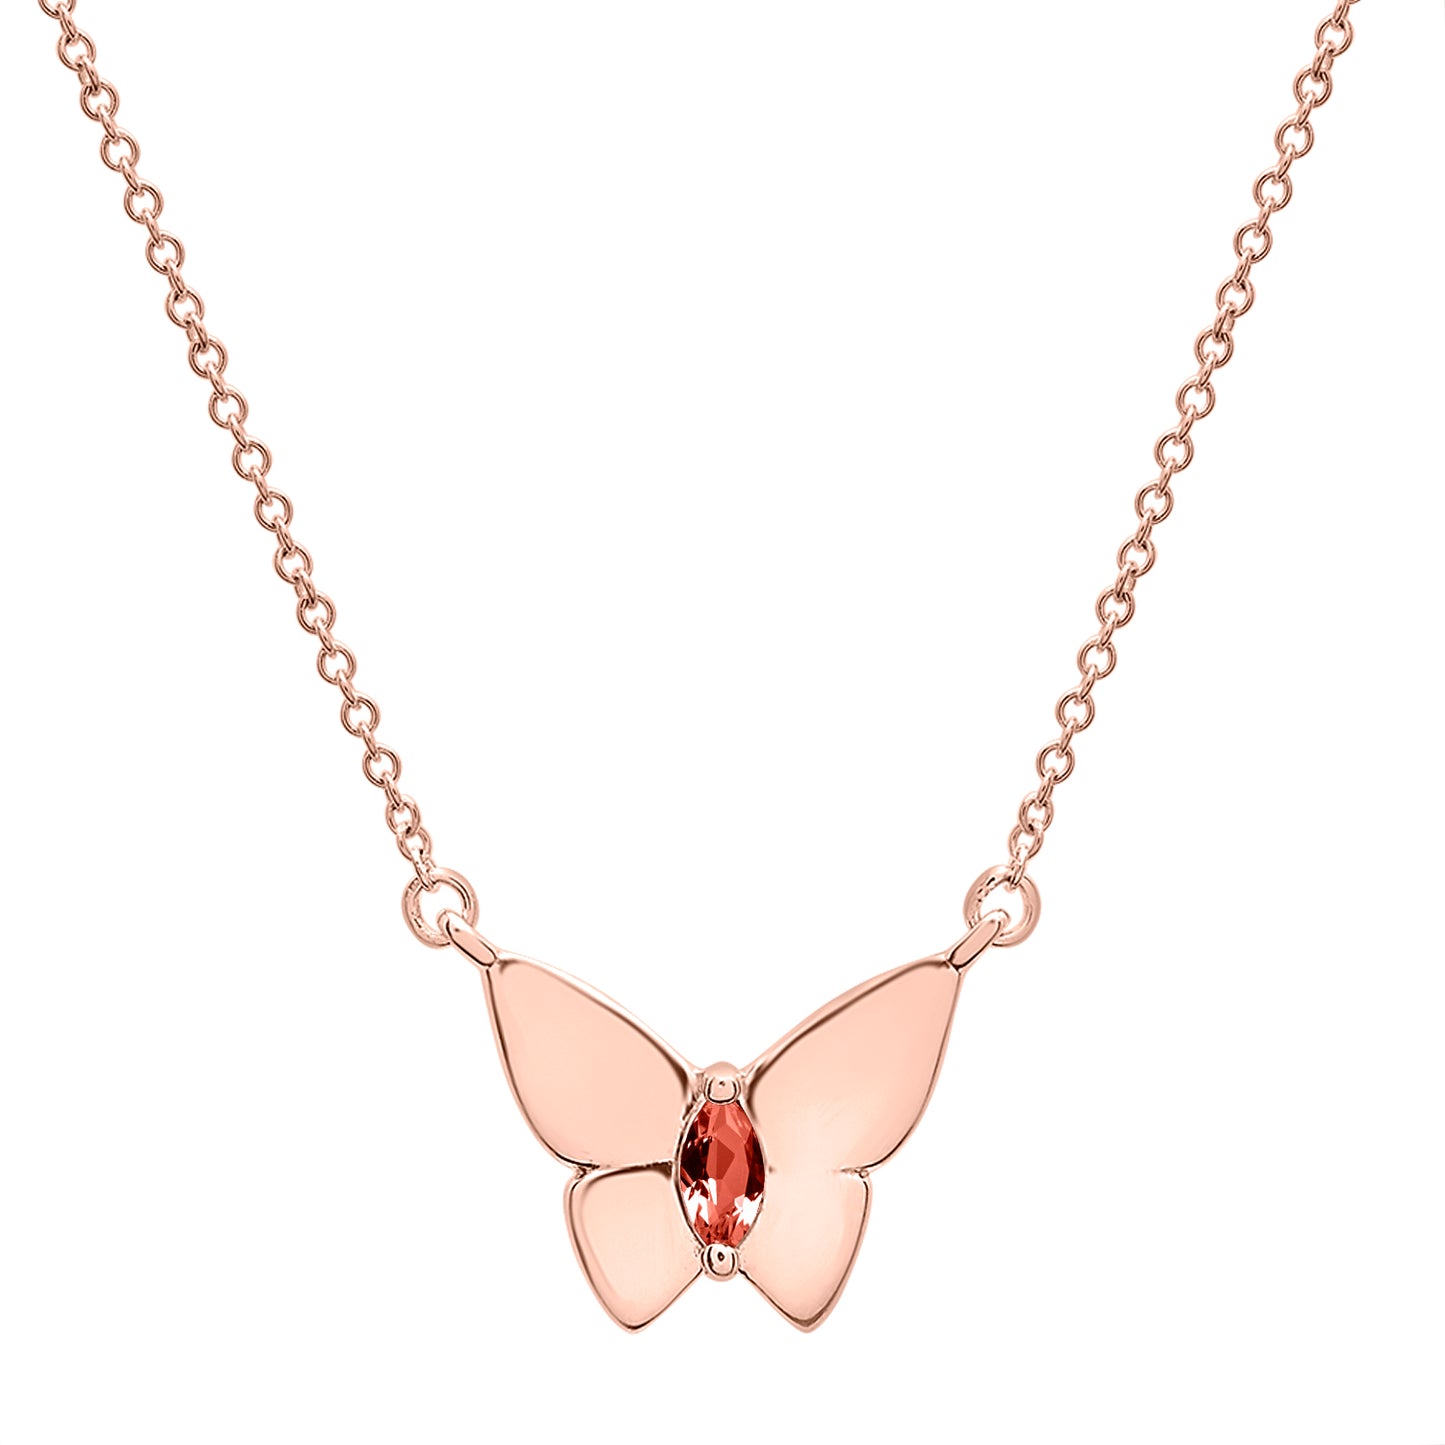 Butterfly Birthstone Necklace in Red with Gold chain